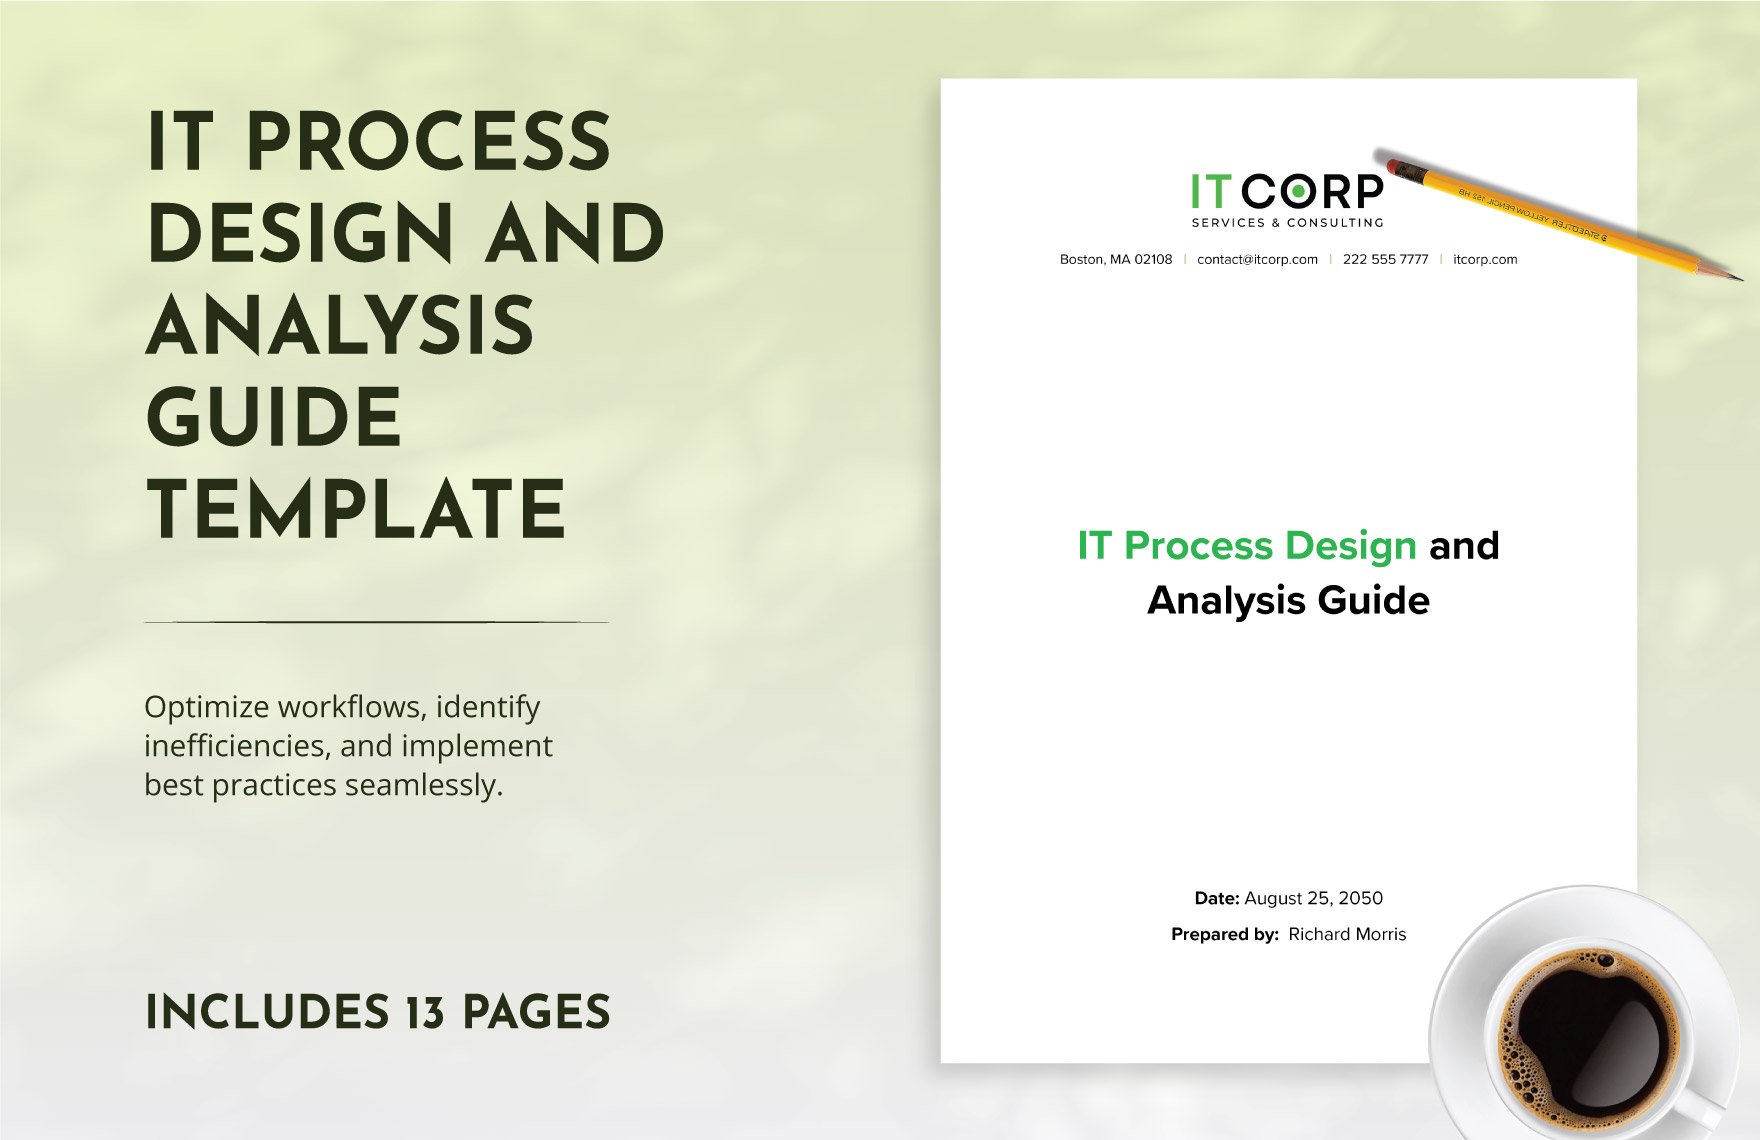 IT Process Design and Analysis Guide Template